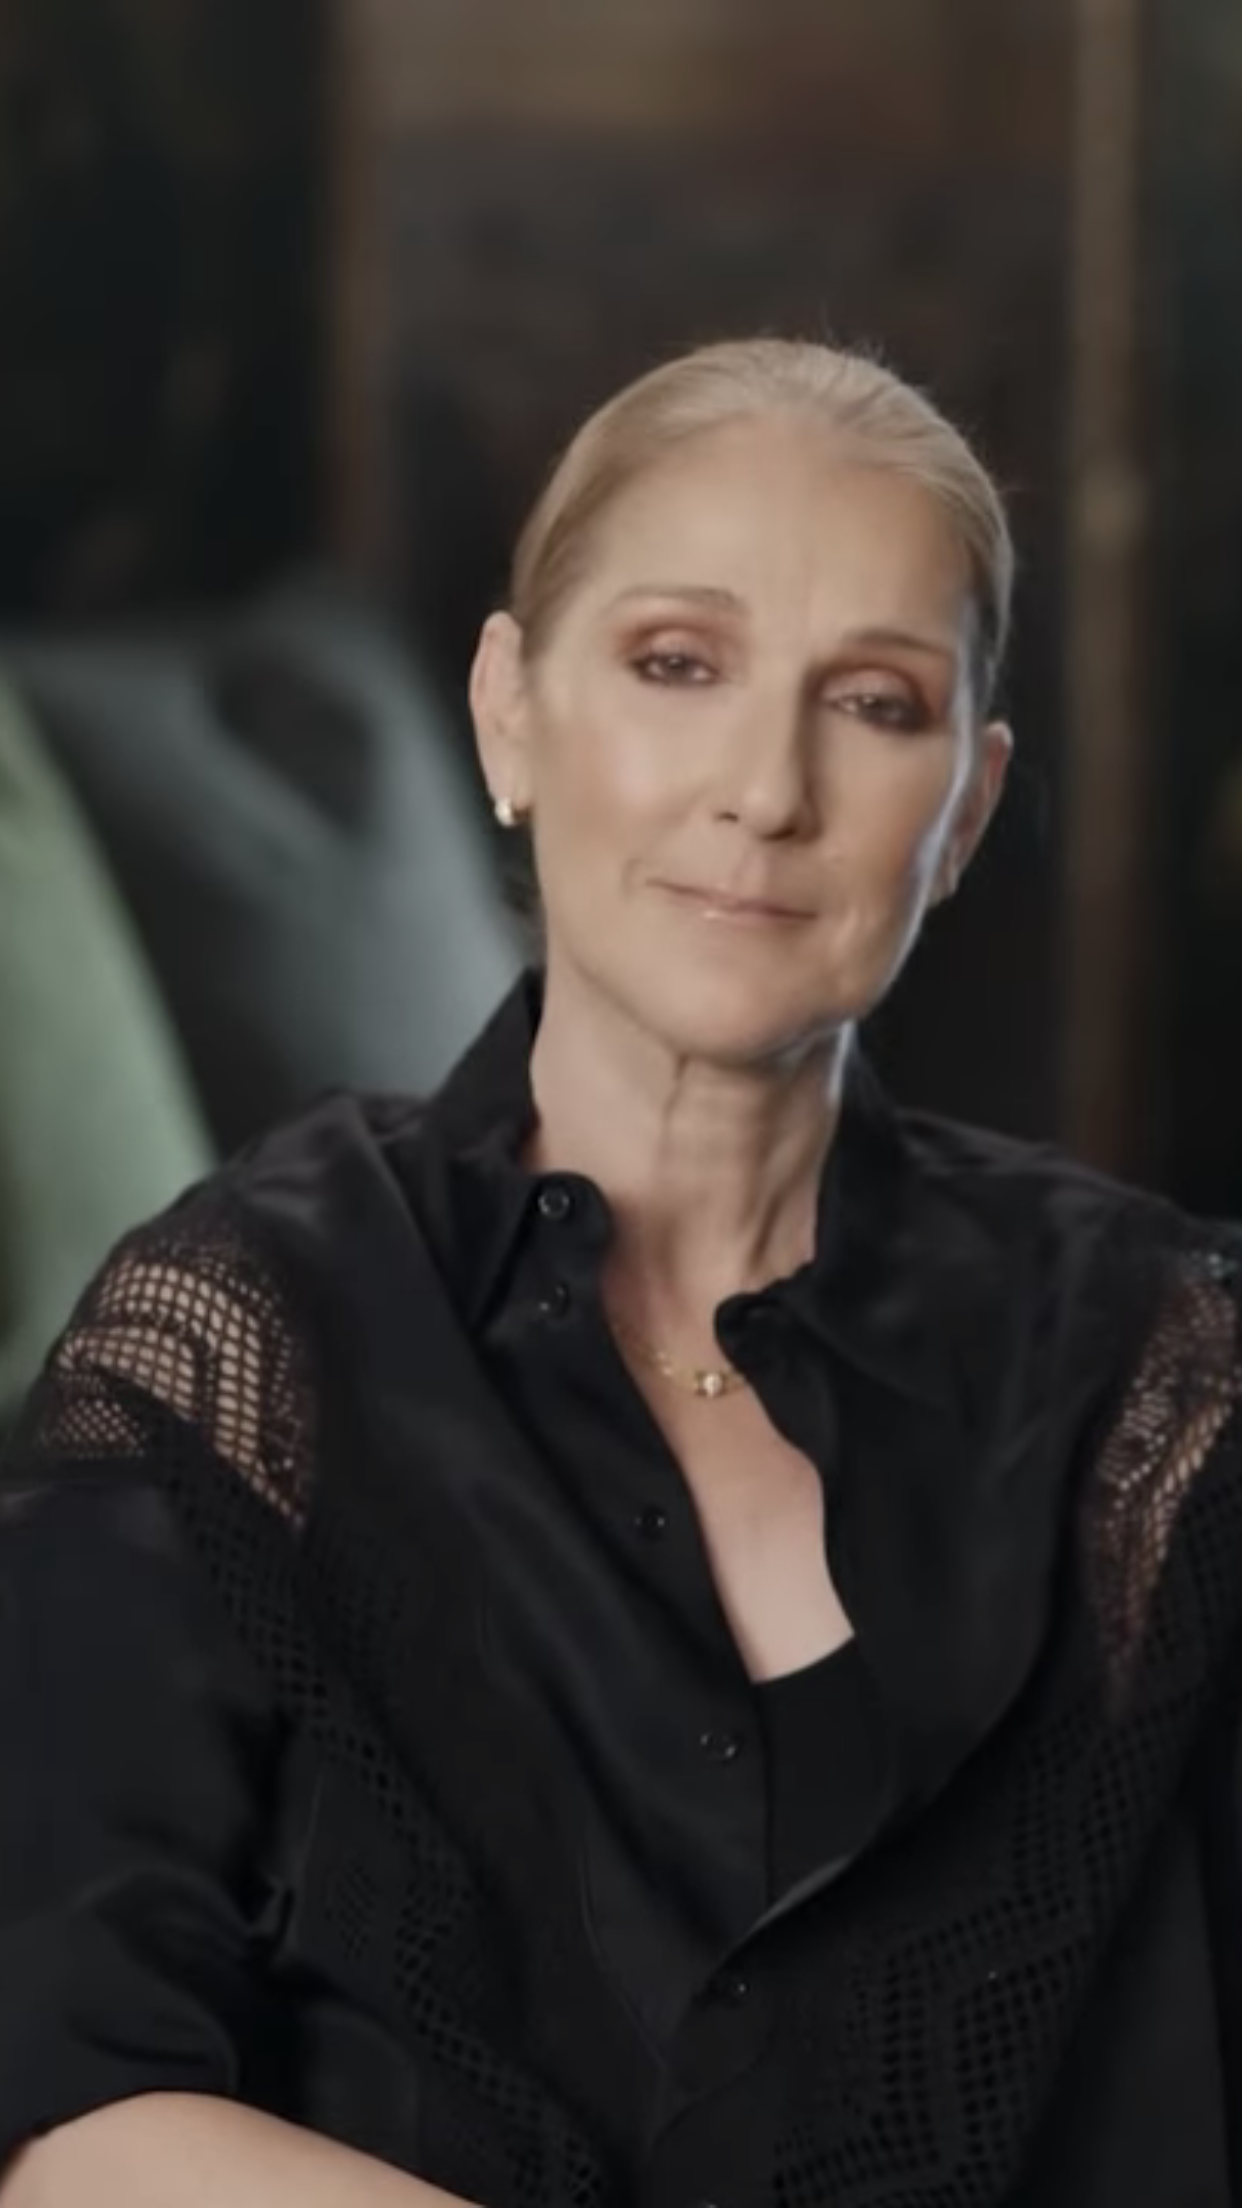 Celine Dion Emotionally Opens Up About Health Issues, Postpones and Cancels Tour Dates